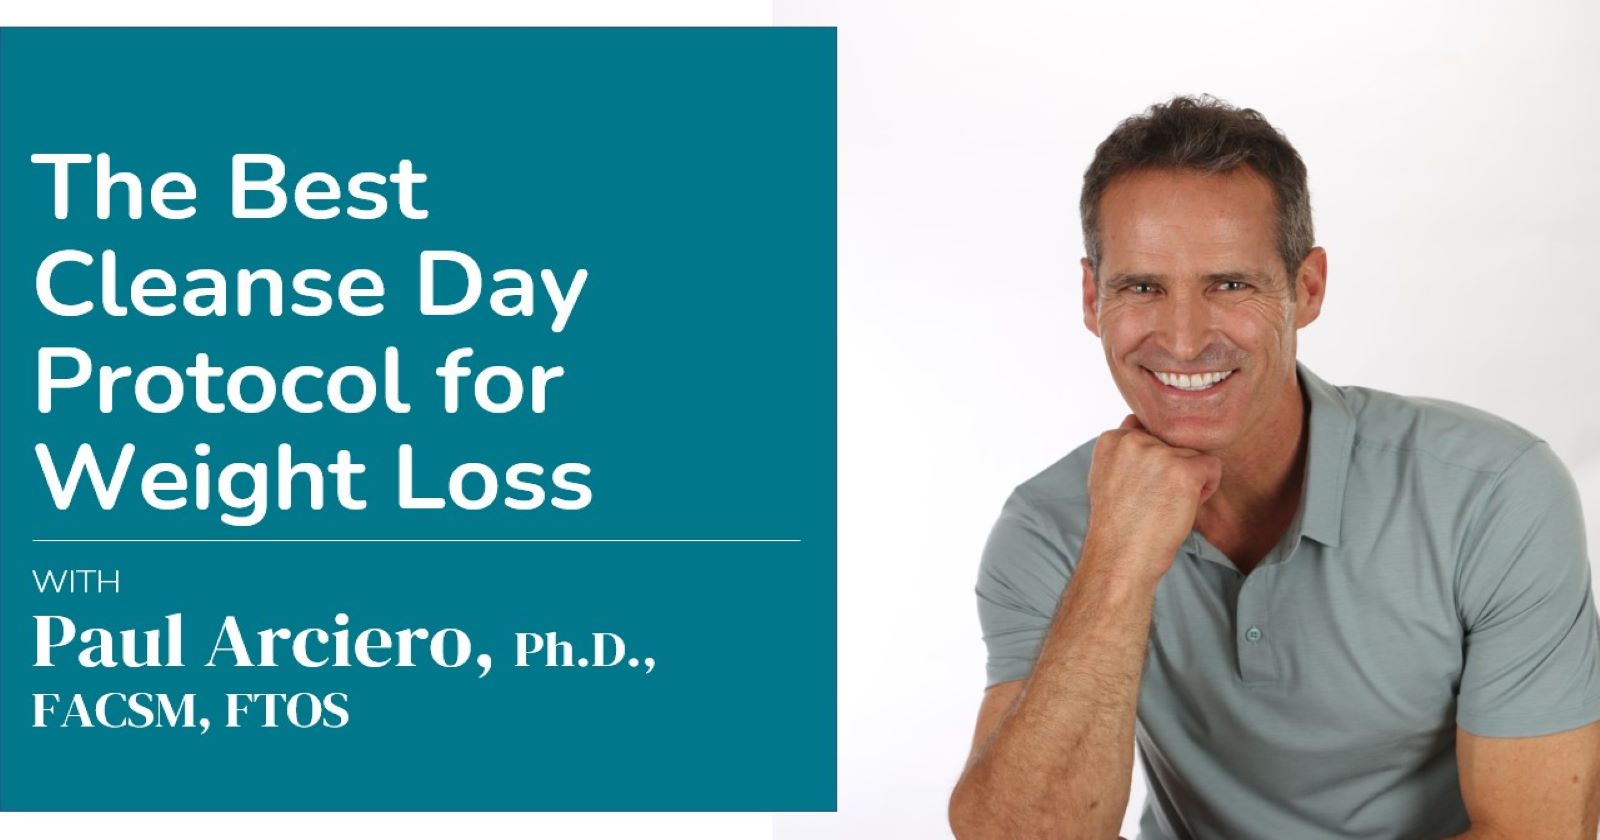 New Study: The Best Cleanse Day Protocol for Weight Loss